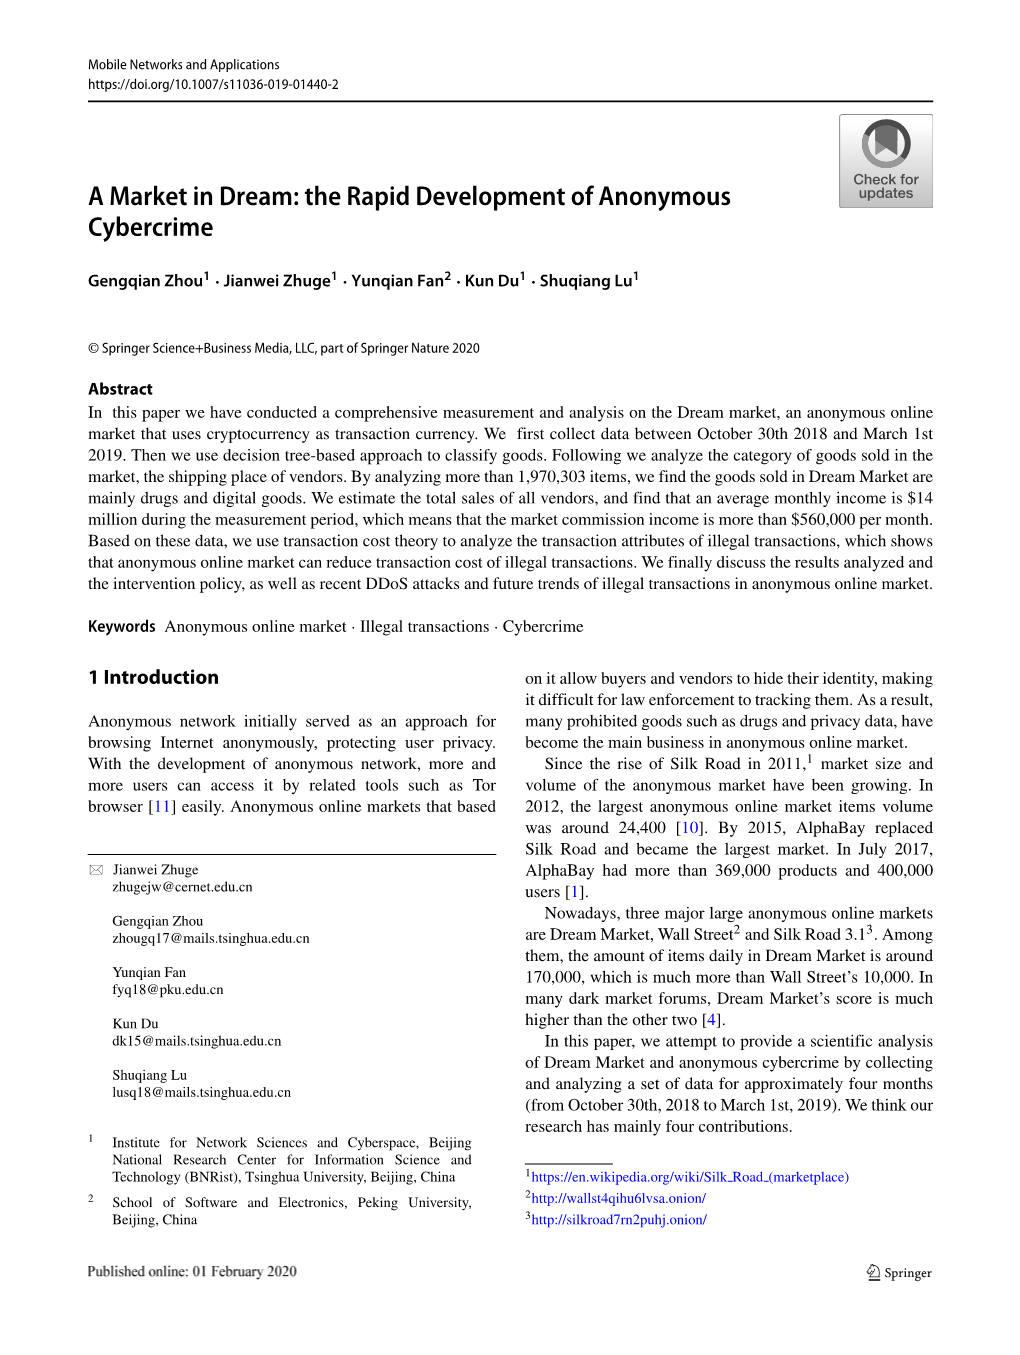 A Market in Dream: the Rapid Development of Anonymous Cybercrime